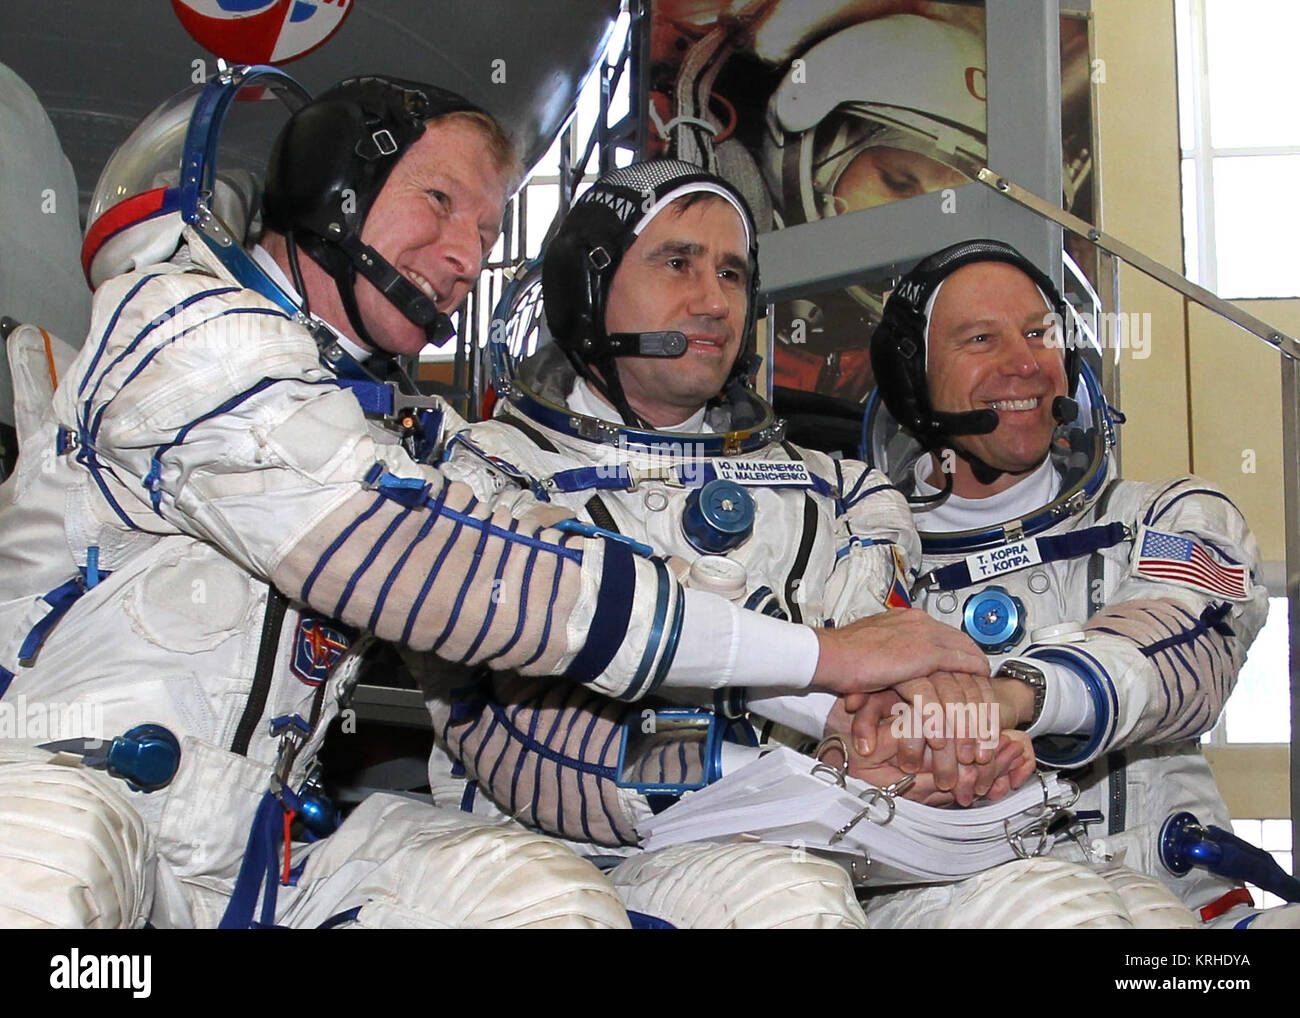 CG4G8846 1 --- (6 May 2015) --- At the Gagarin Cosmonaut Training Center in Star City, Russia, Expedition 44/45 backup crewmembers Timothy Peake of the European Space Agency (left), Yuri Malenchenko of the Russian Federal Space Agency (Roscosmos, center) and Timothy Kopra of NASA (right) pose for pictures in front of a Soyuz spacecraft simulator May 6 as part of their final qualification exams for flight. They are the backups to the prime crew --- Kjell Lindgren of NASA, Oleg Kononenko of Roscosmos and Kimya Yui of the Japan Aerospace Exploration Agency --- who are in the final stages of train Stock Photo